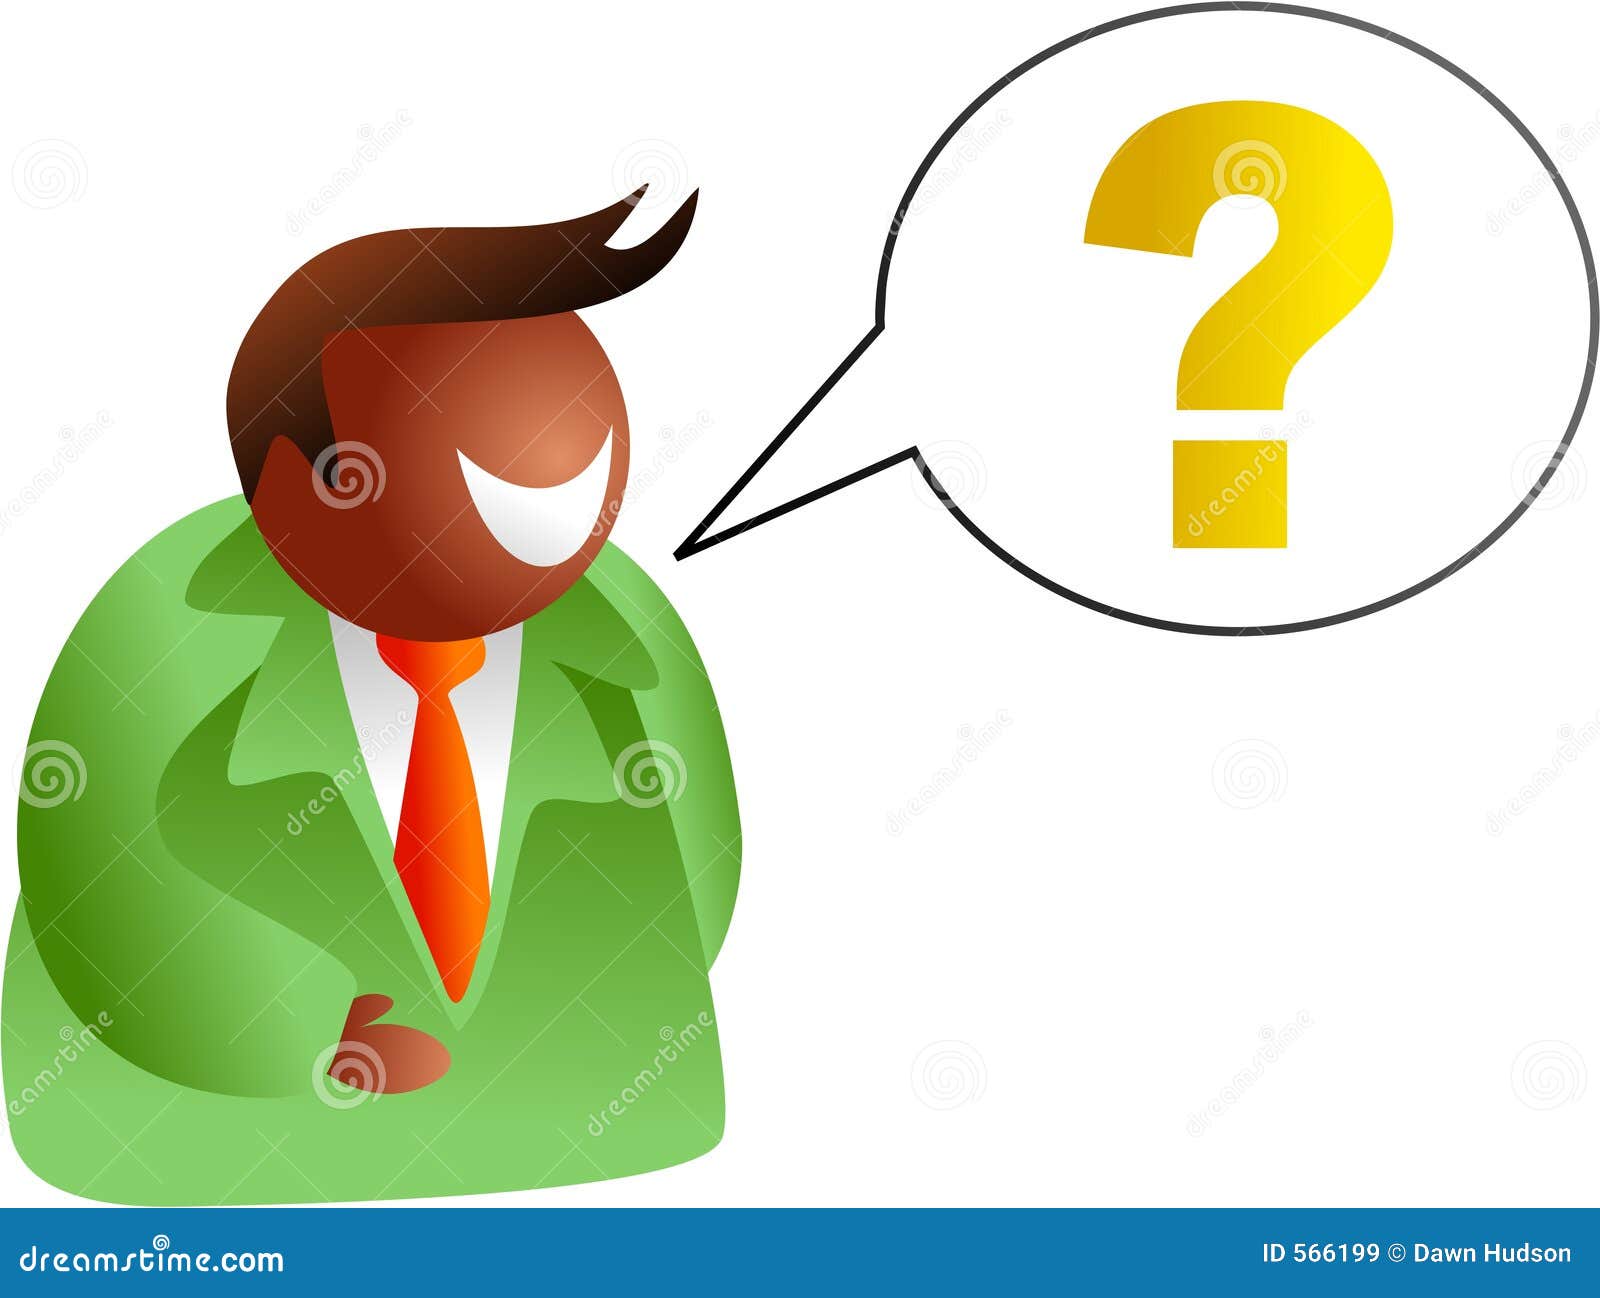 clipart man asking question - photo #22